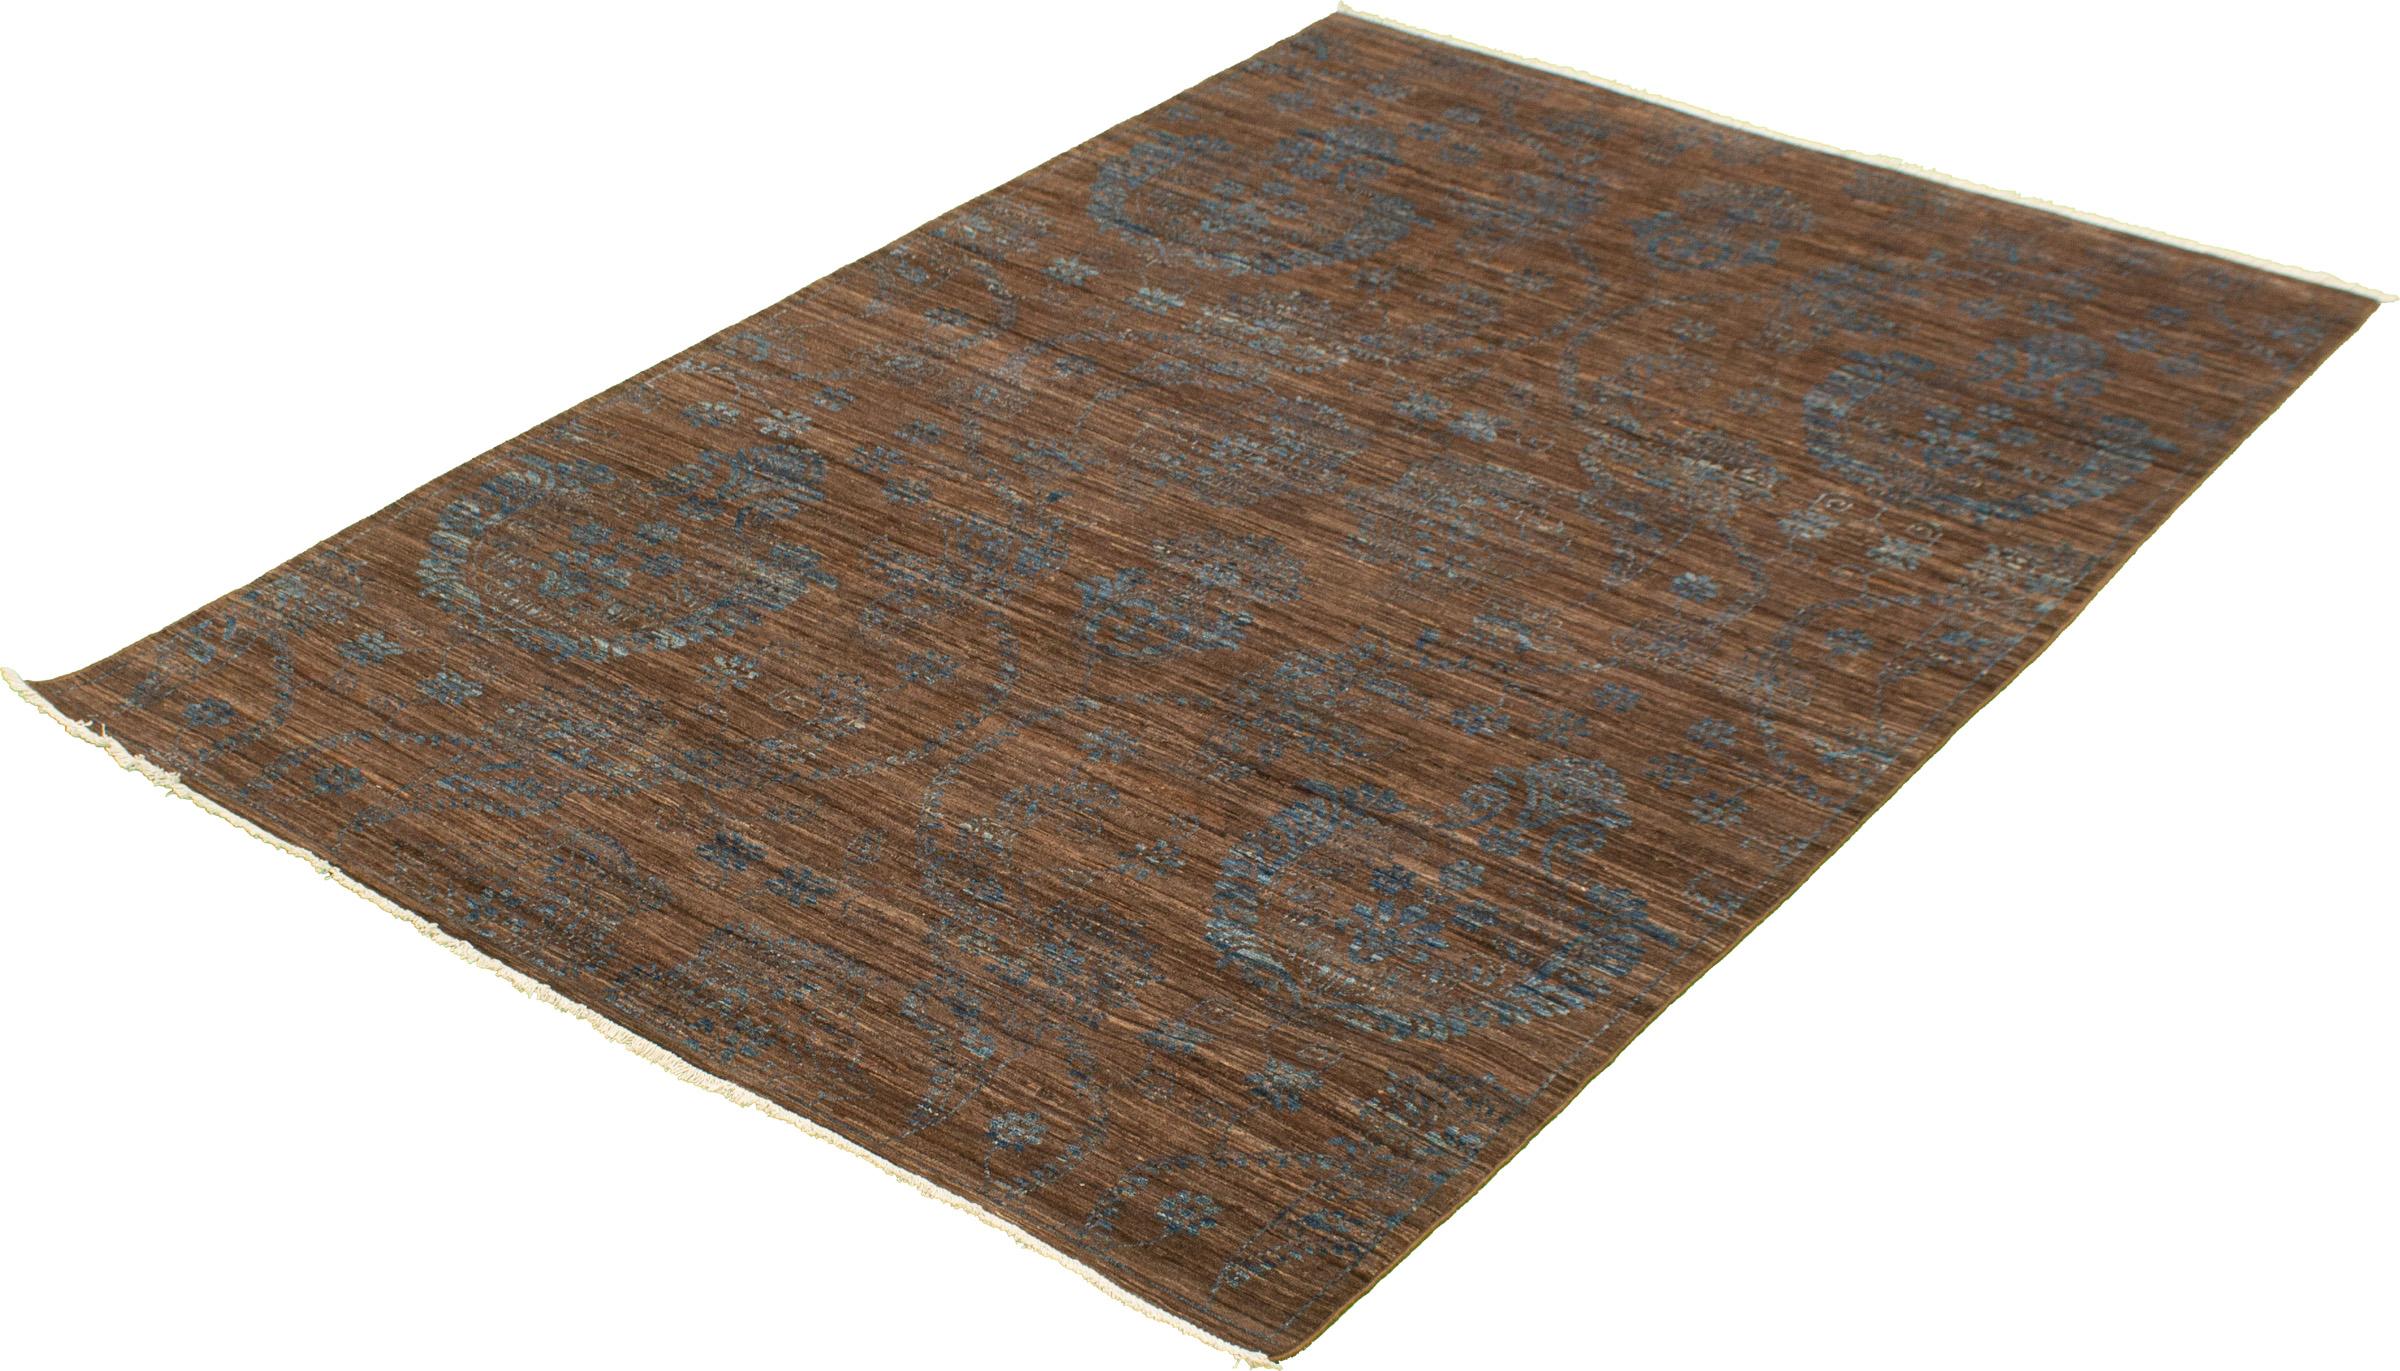 Vegetable Dyed Hand-Knotted Wool Persian Rug, Blue and Brown, 6’ x 9’ For Sale